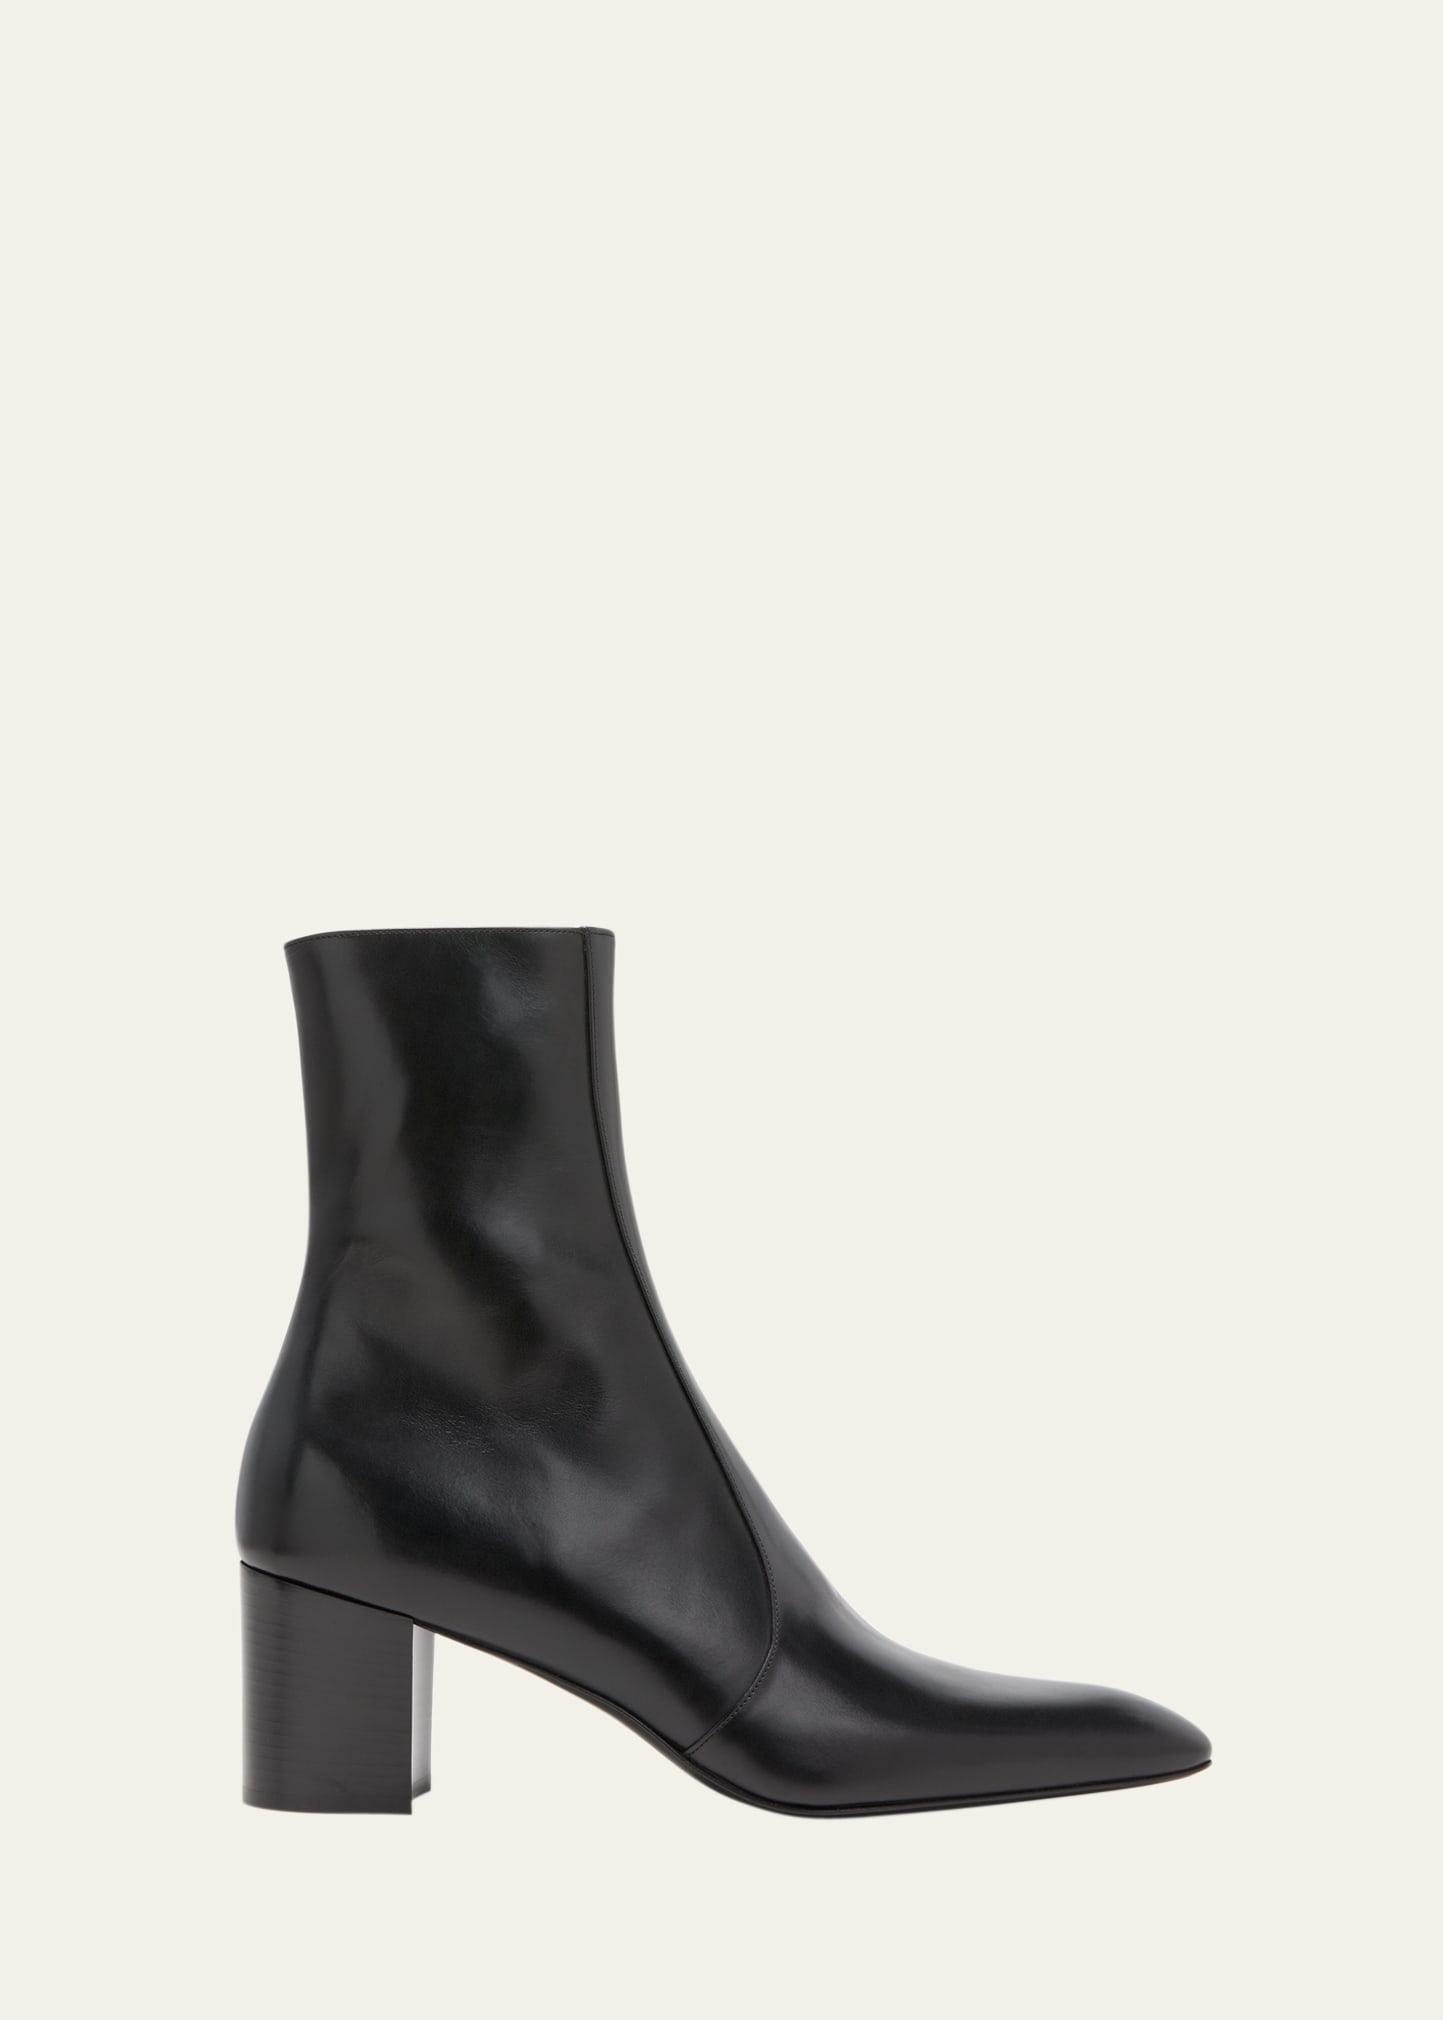 Saint Laurent Leather Ankle Boots 70 In Black